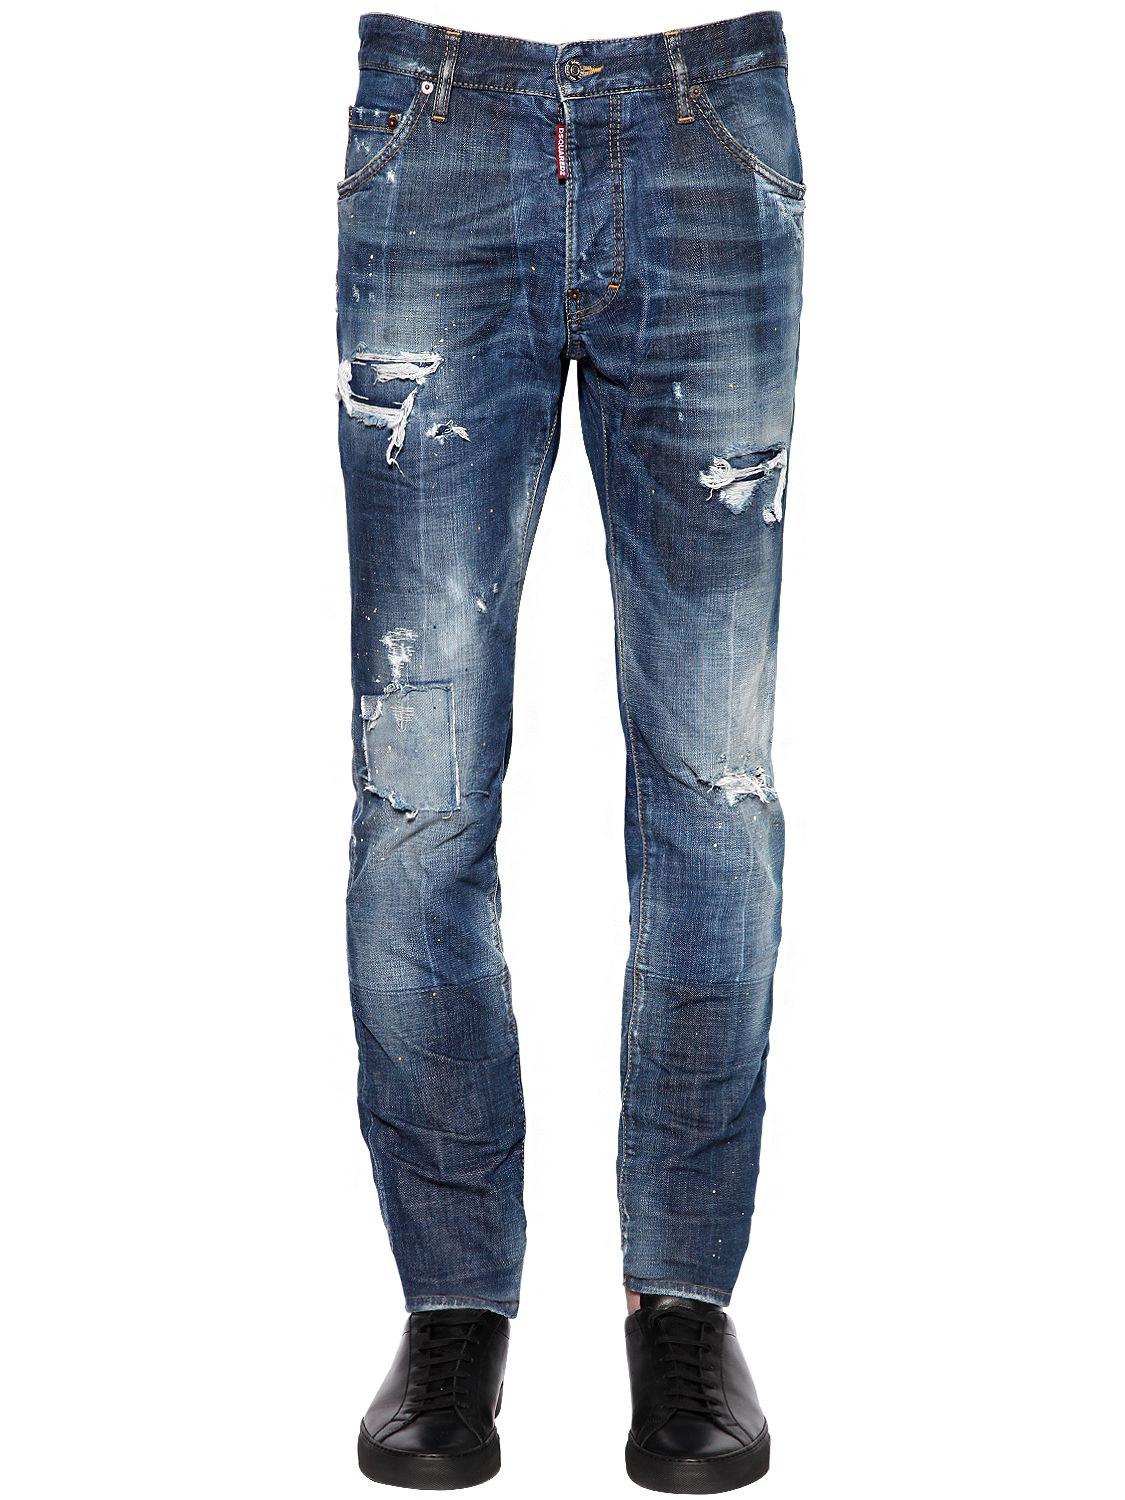 Lyst - Dsquared² 16.5cm Cool Guy Distressed Denim Jeans in Blue for Men